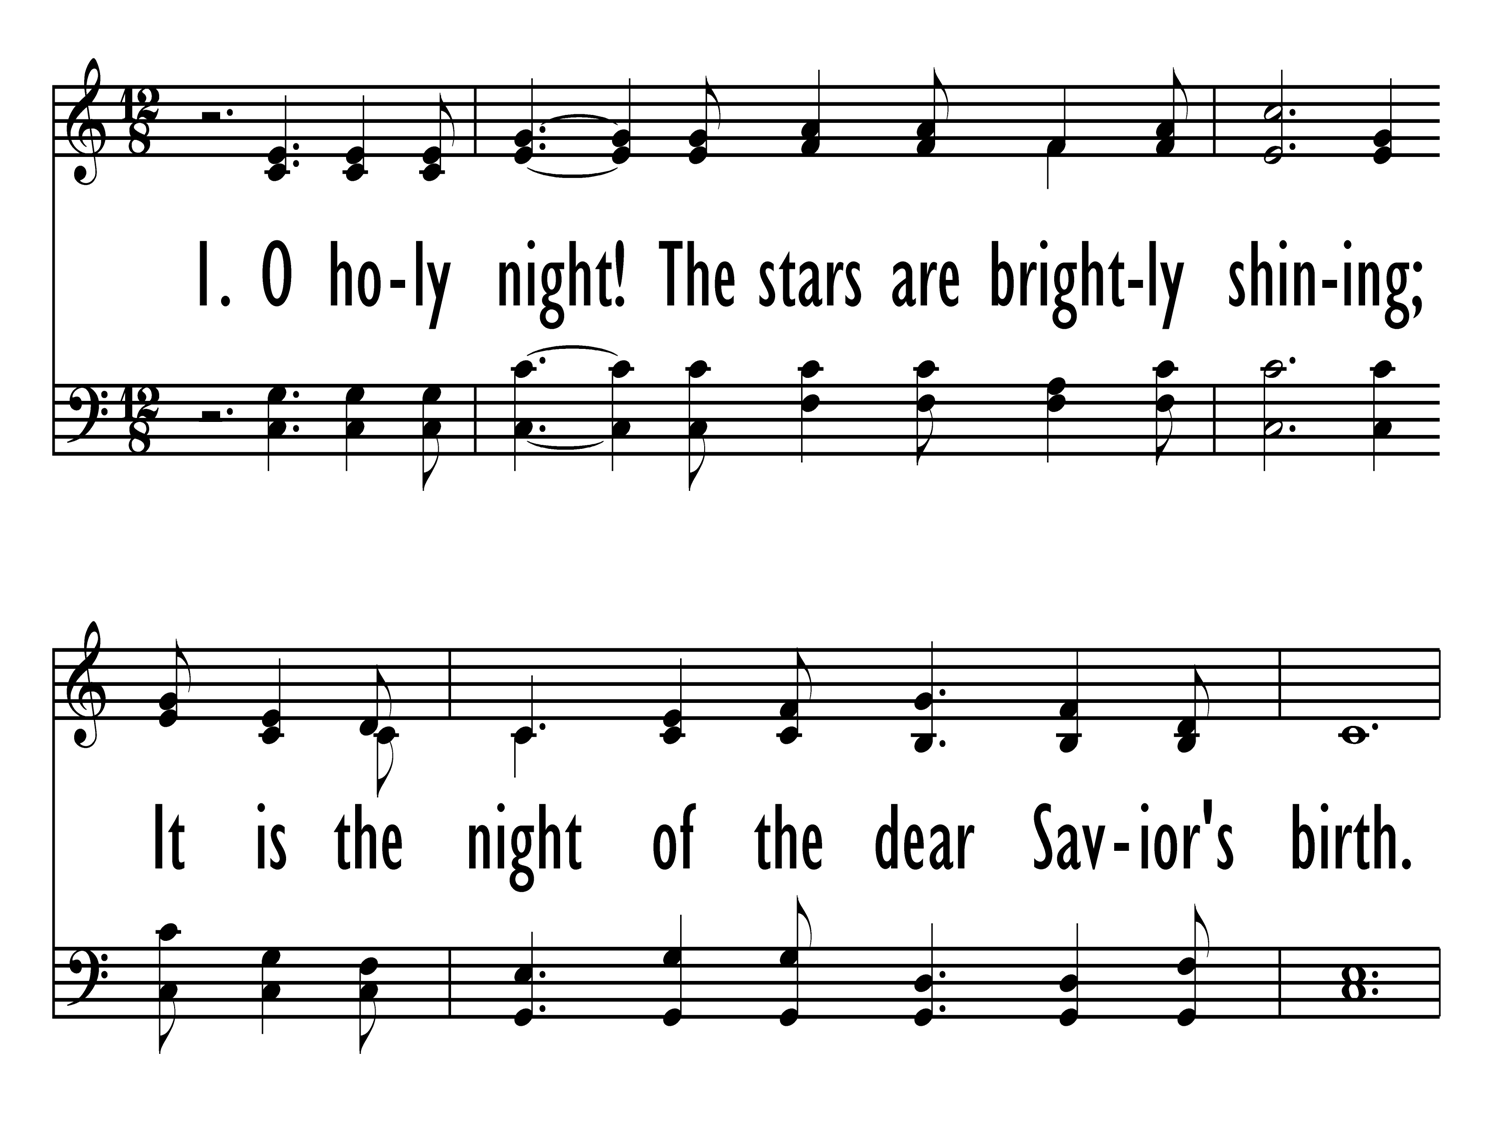 Simple Pages Page Pieces - Oh, Holy Night – Simple Stories